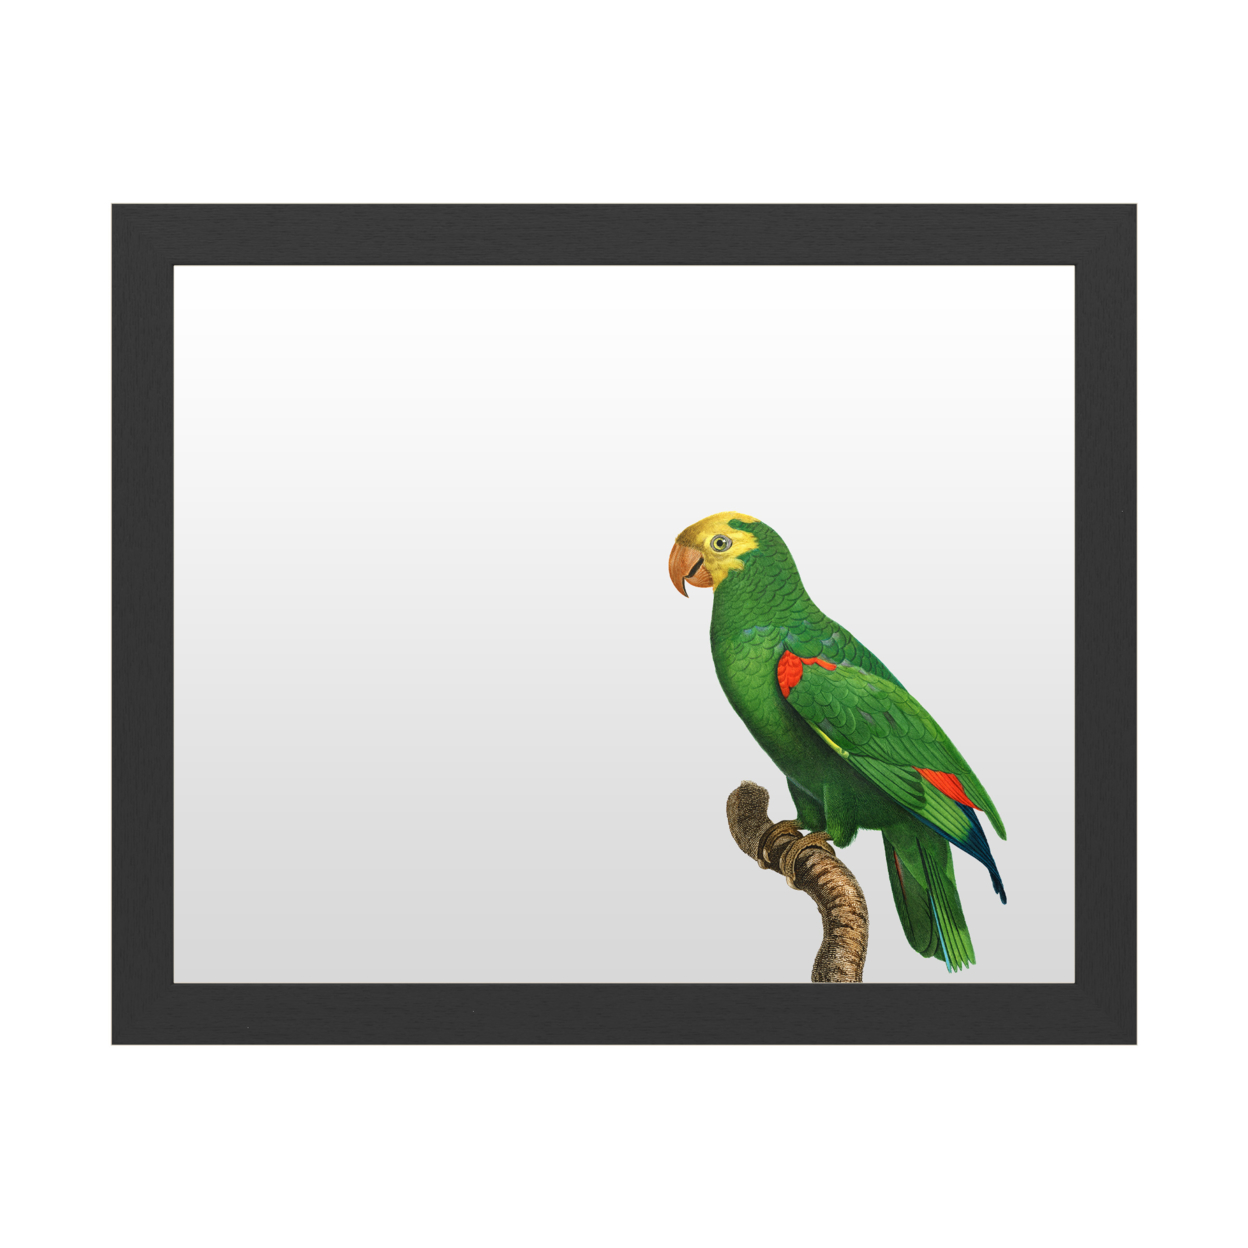 Dry Erase 16 X 20 Marker Board With Printed Artwork - Barraband Parrot Of The Tropics Iii White Board - Ready To Hang